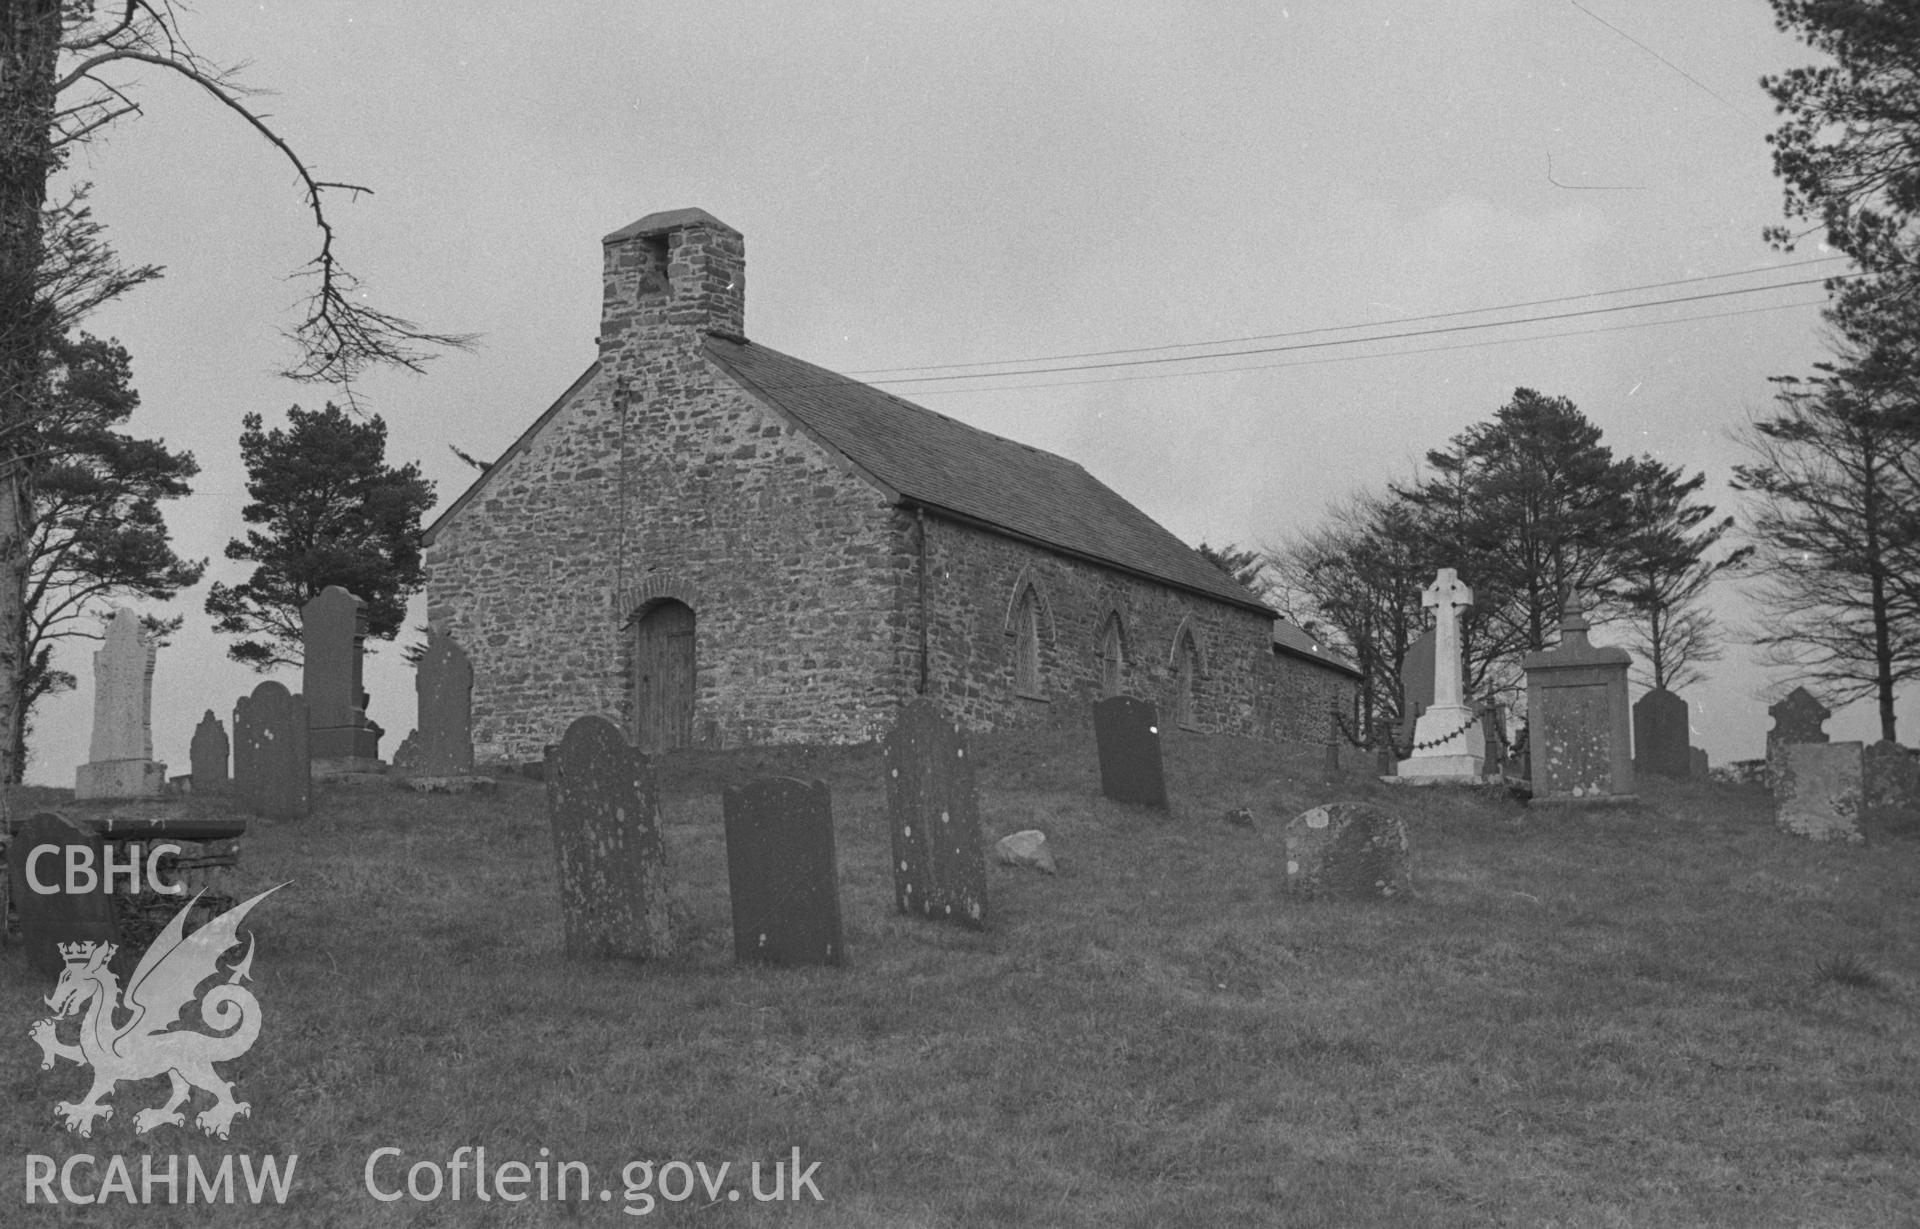 Digital copy of a black and white negative showing exterior view of St. Padarns church, Llanbadarn Odyn. Photographed in April 1964 by Arthur O. Chater from Grid Reference SN 6341 6047, looking north east.